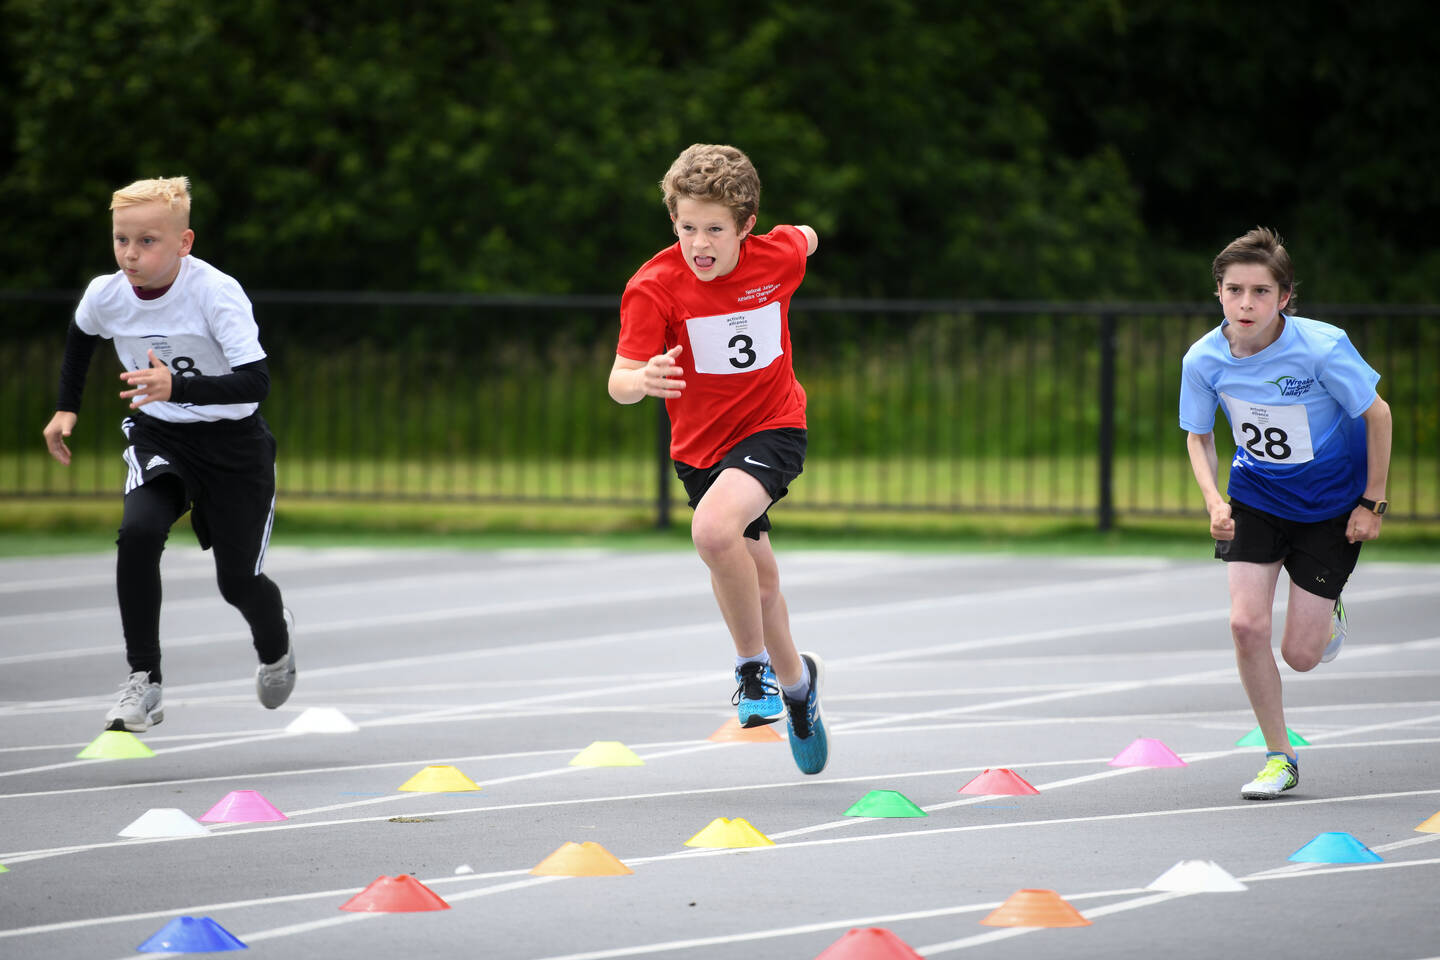 3 athletes taking part in 100m race at National Junior Athletics Championships 2022